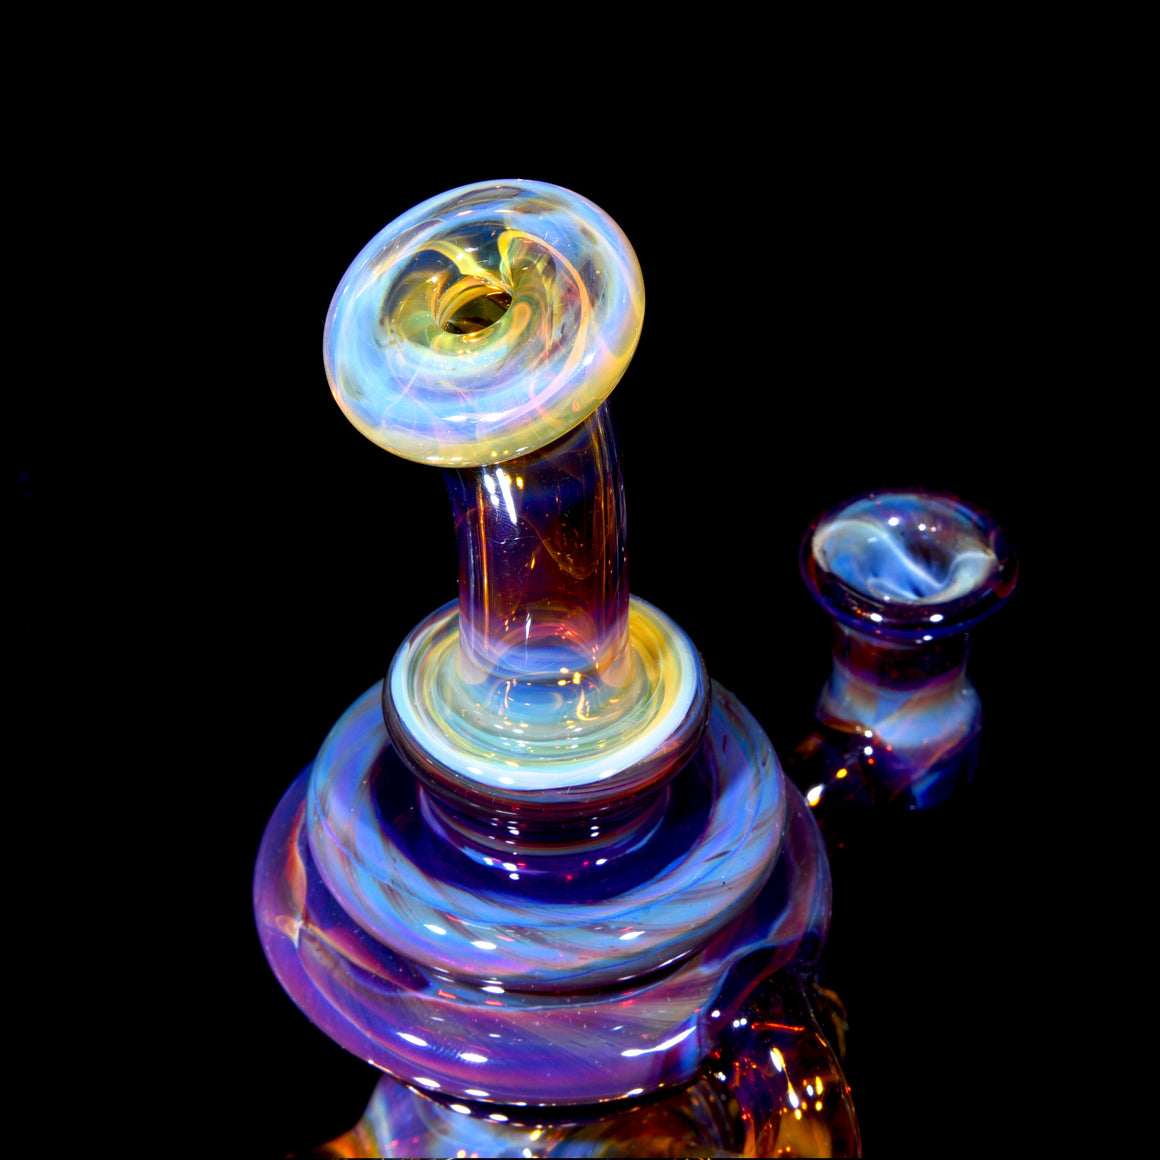 Refined Klein Recycler - NS Yellow/Amber Purple - 10mm Female